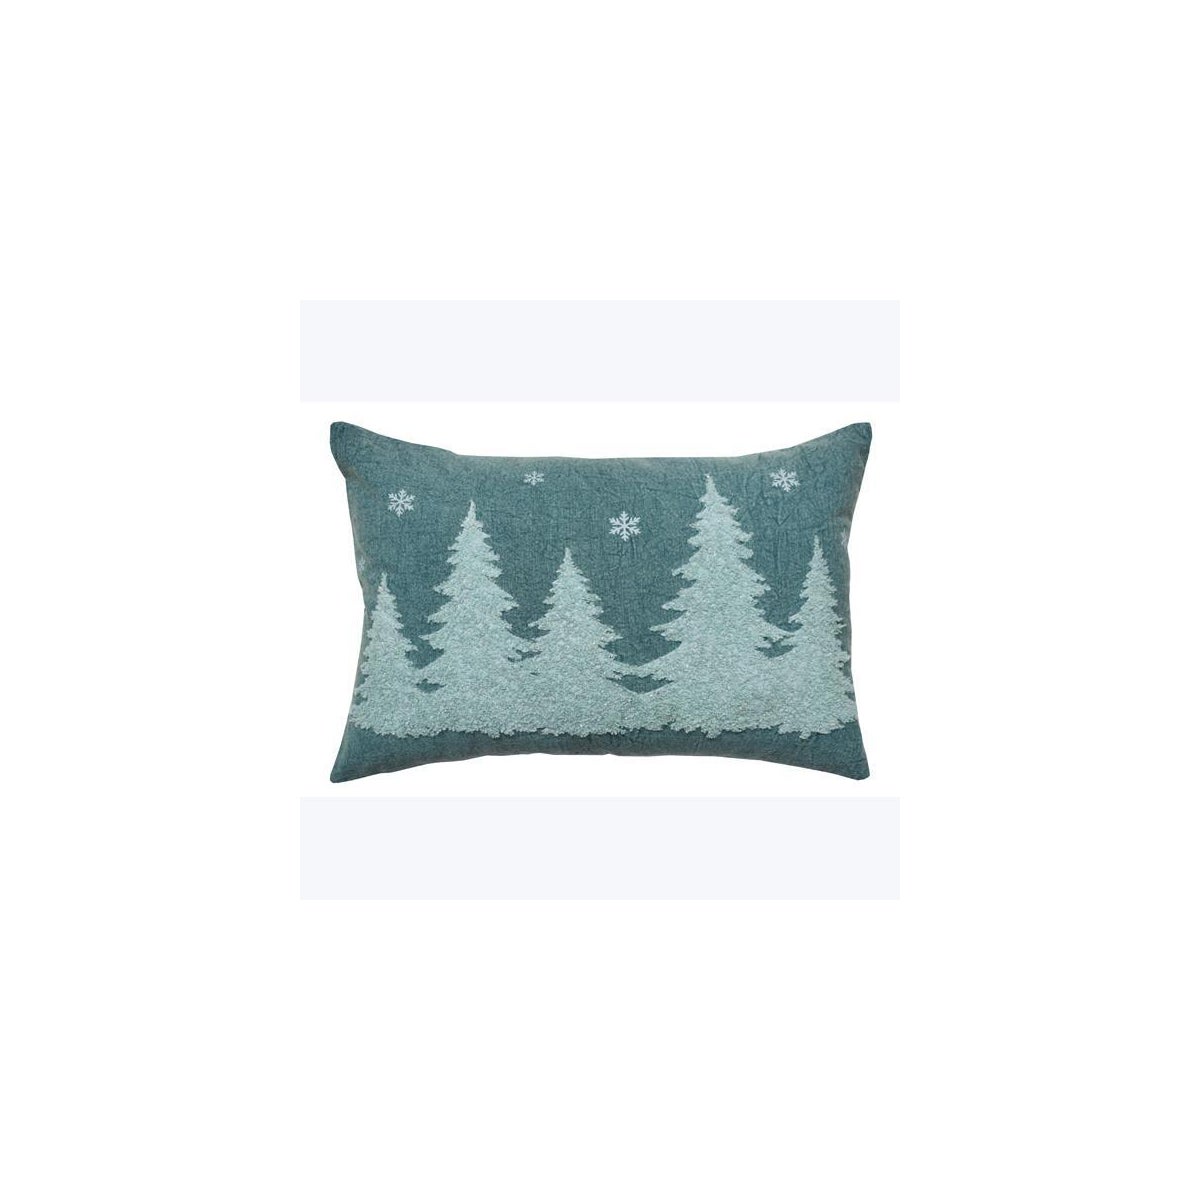 Cotton 20x14 Pillow Embroidered Tree and Snowflake